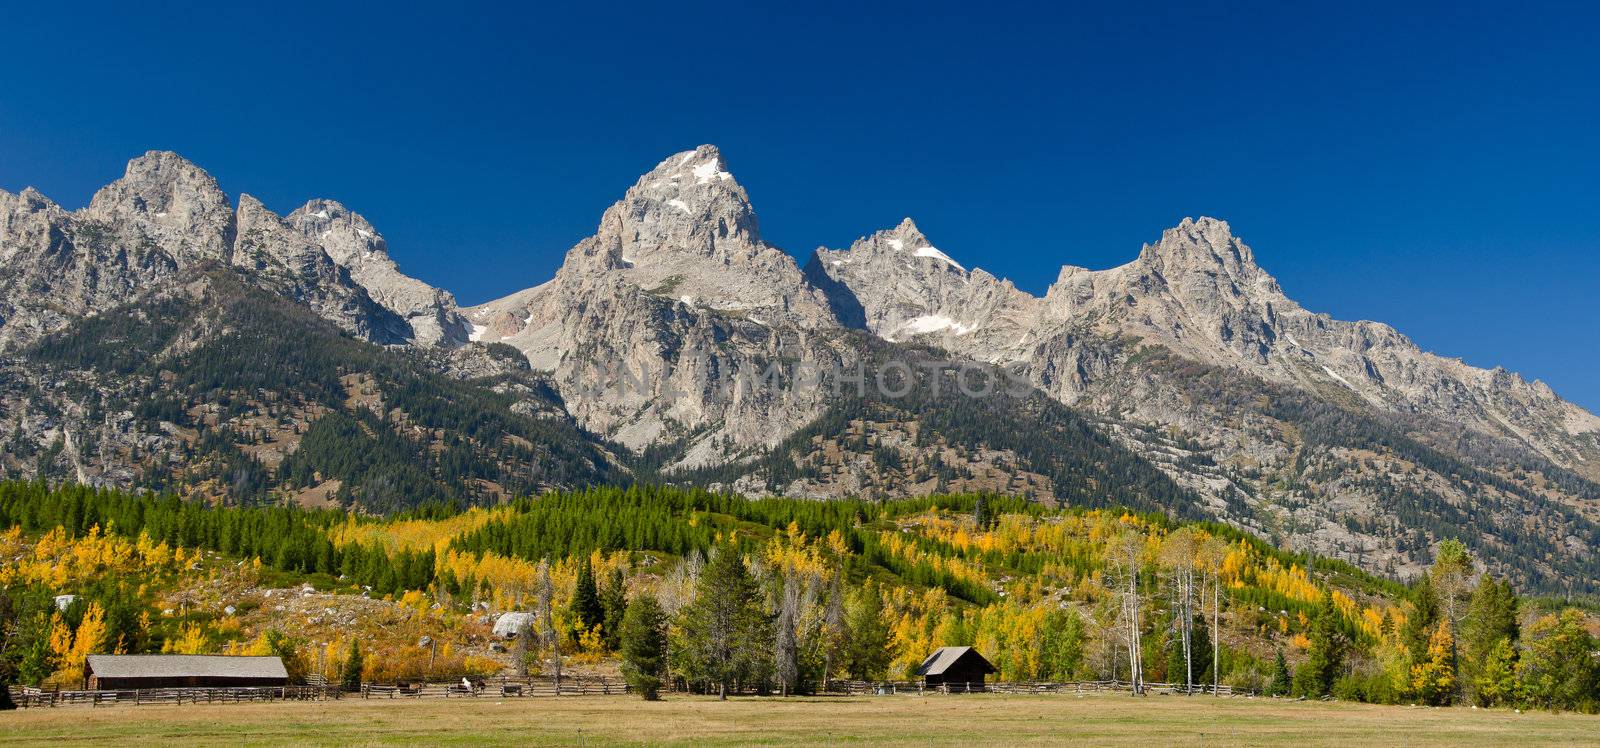 Horse ranch and the Teton Mountains in autumn, Grand Teton National Park, Wyoming, USA by CharlesBolin